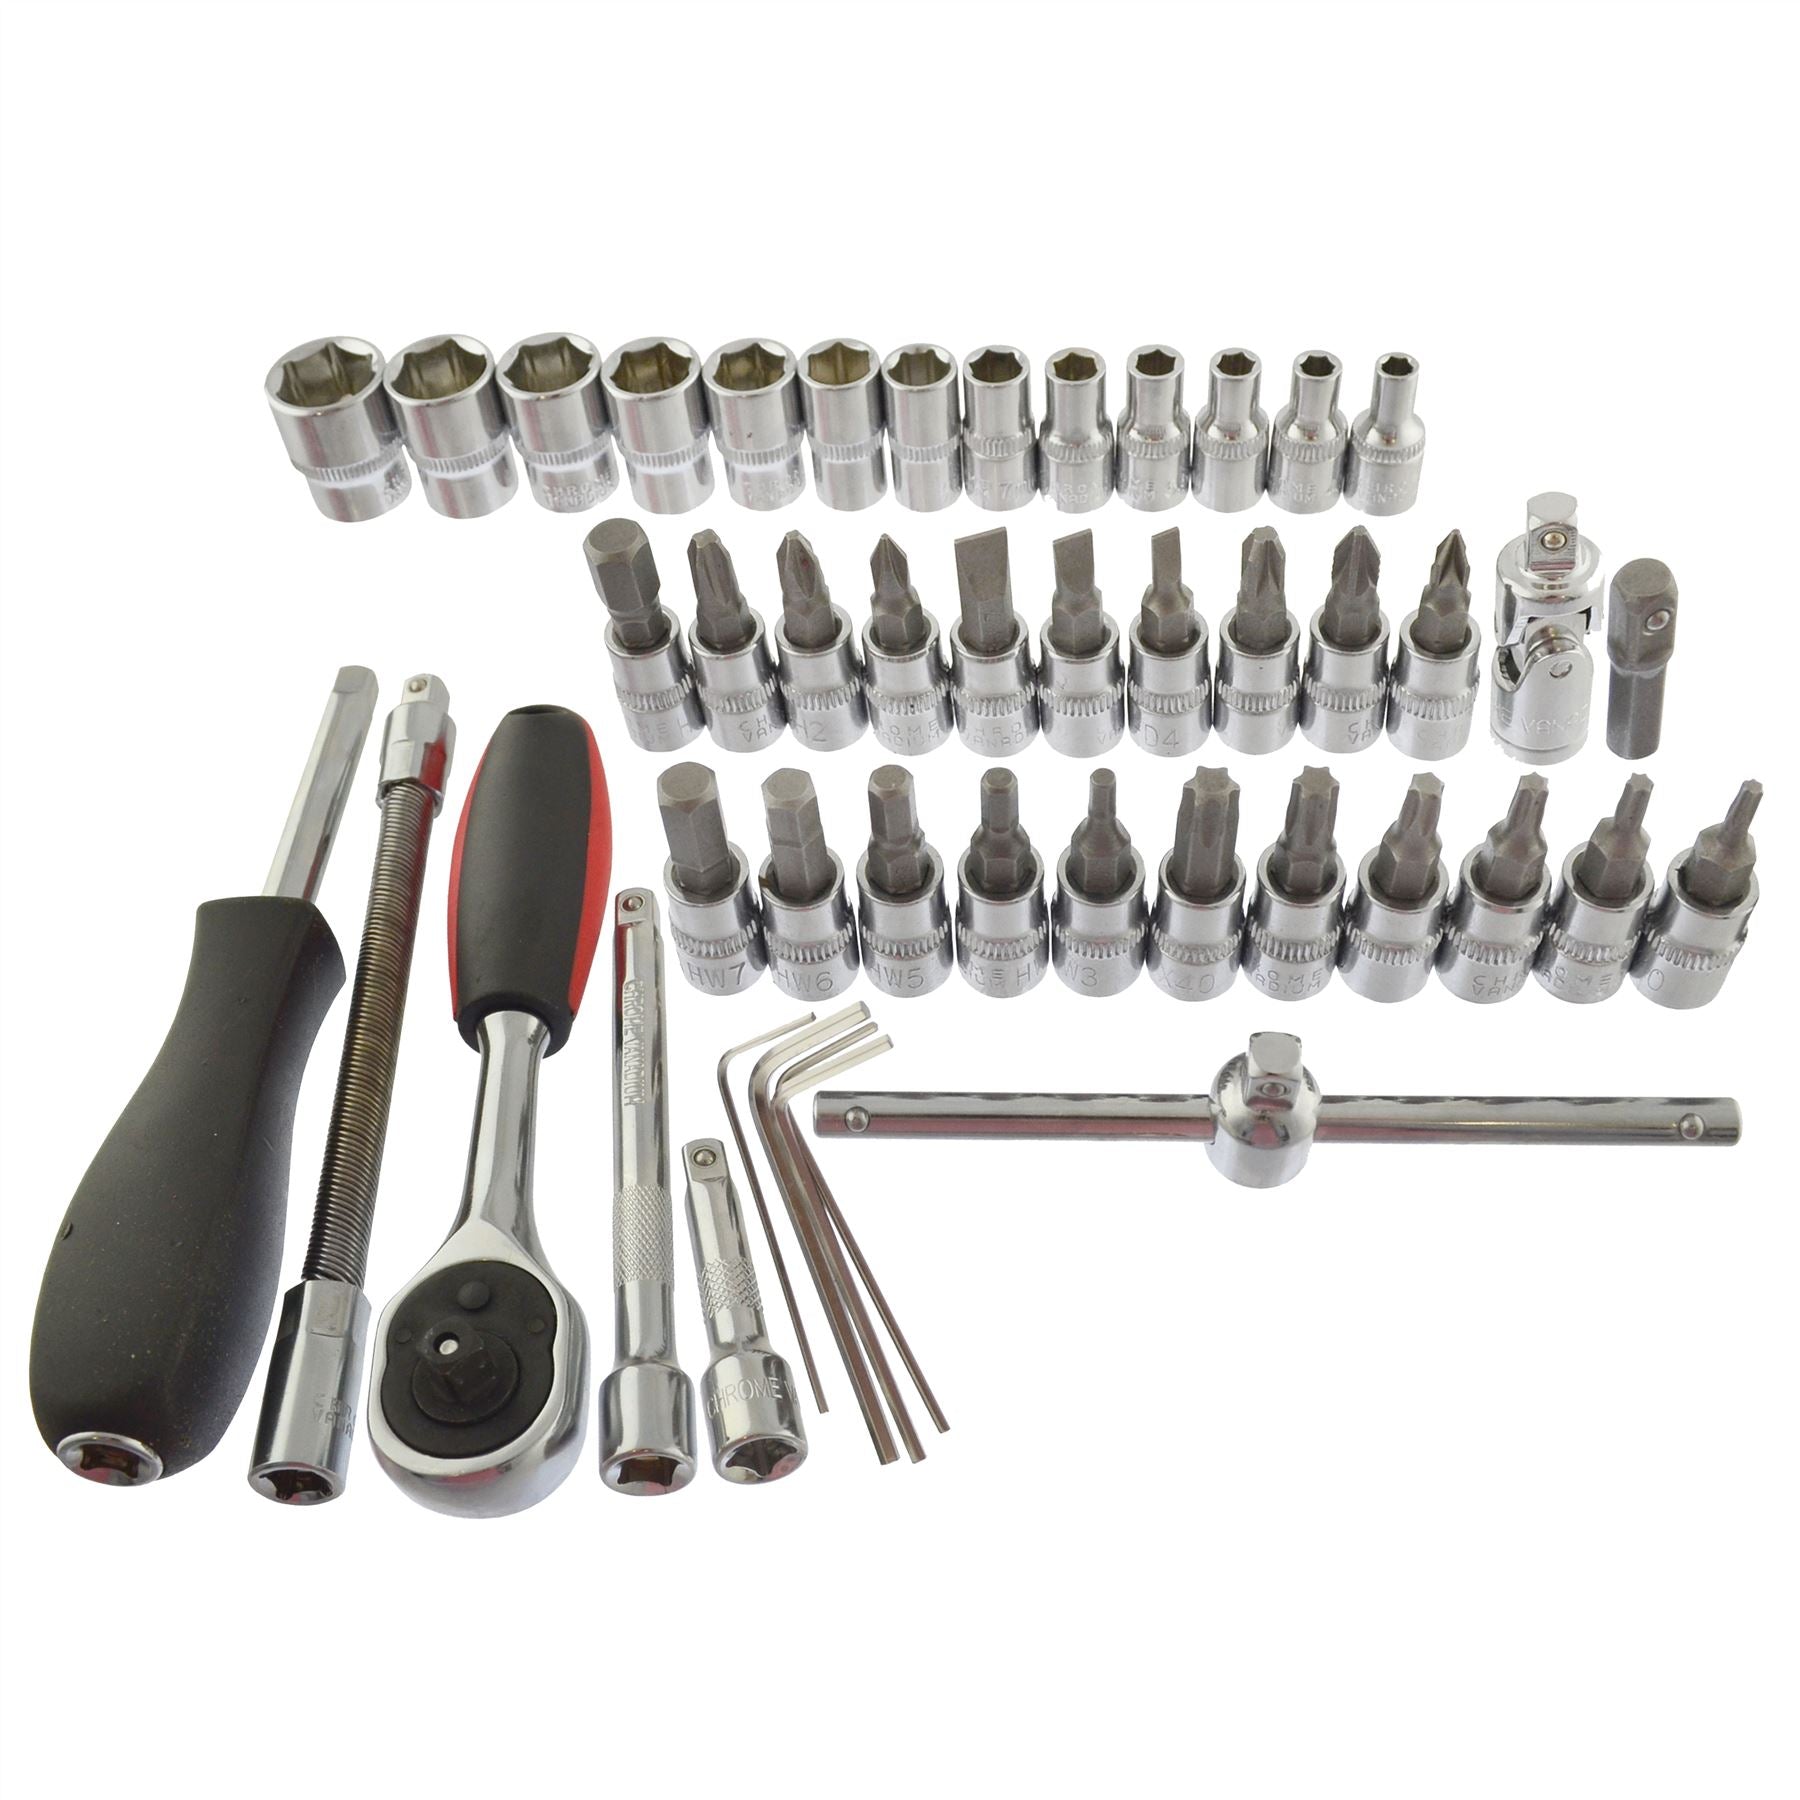 1/4" Drive Metric MM Socket And Accessory Set 46pc 4mm - 14mm  AN041